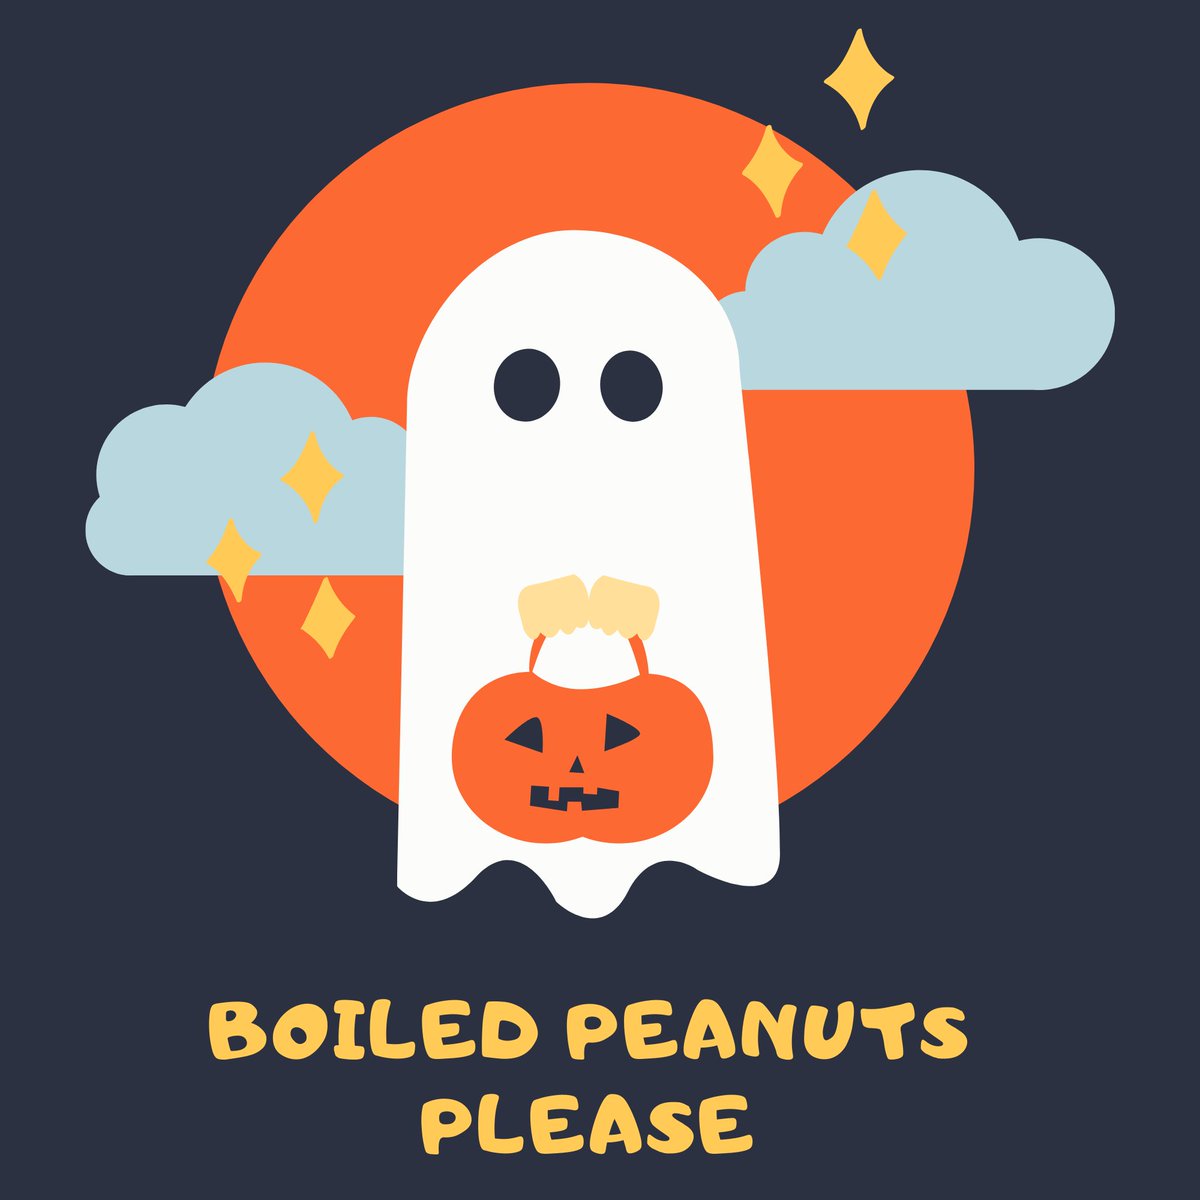 grab some today at @refindsc !
.
.
.
.
.

#boiledpeanuts #delivery #columbiasc #downtowncolumbiasc #florencesc #southernfood #grits #roadside #westcolumbia #forestacres #rosewood #punk #punkart #southcarolina #southern #garnersferry 
#halloween #halloween2020